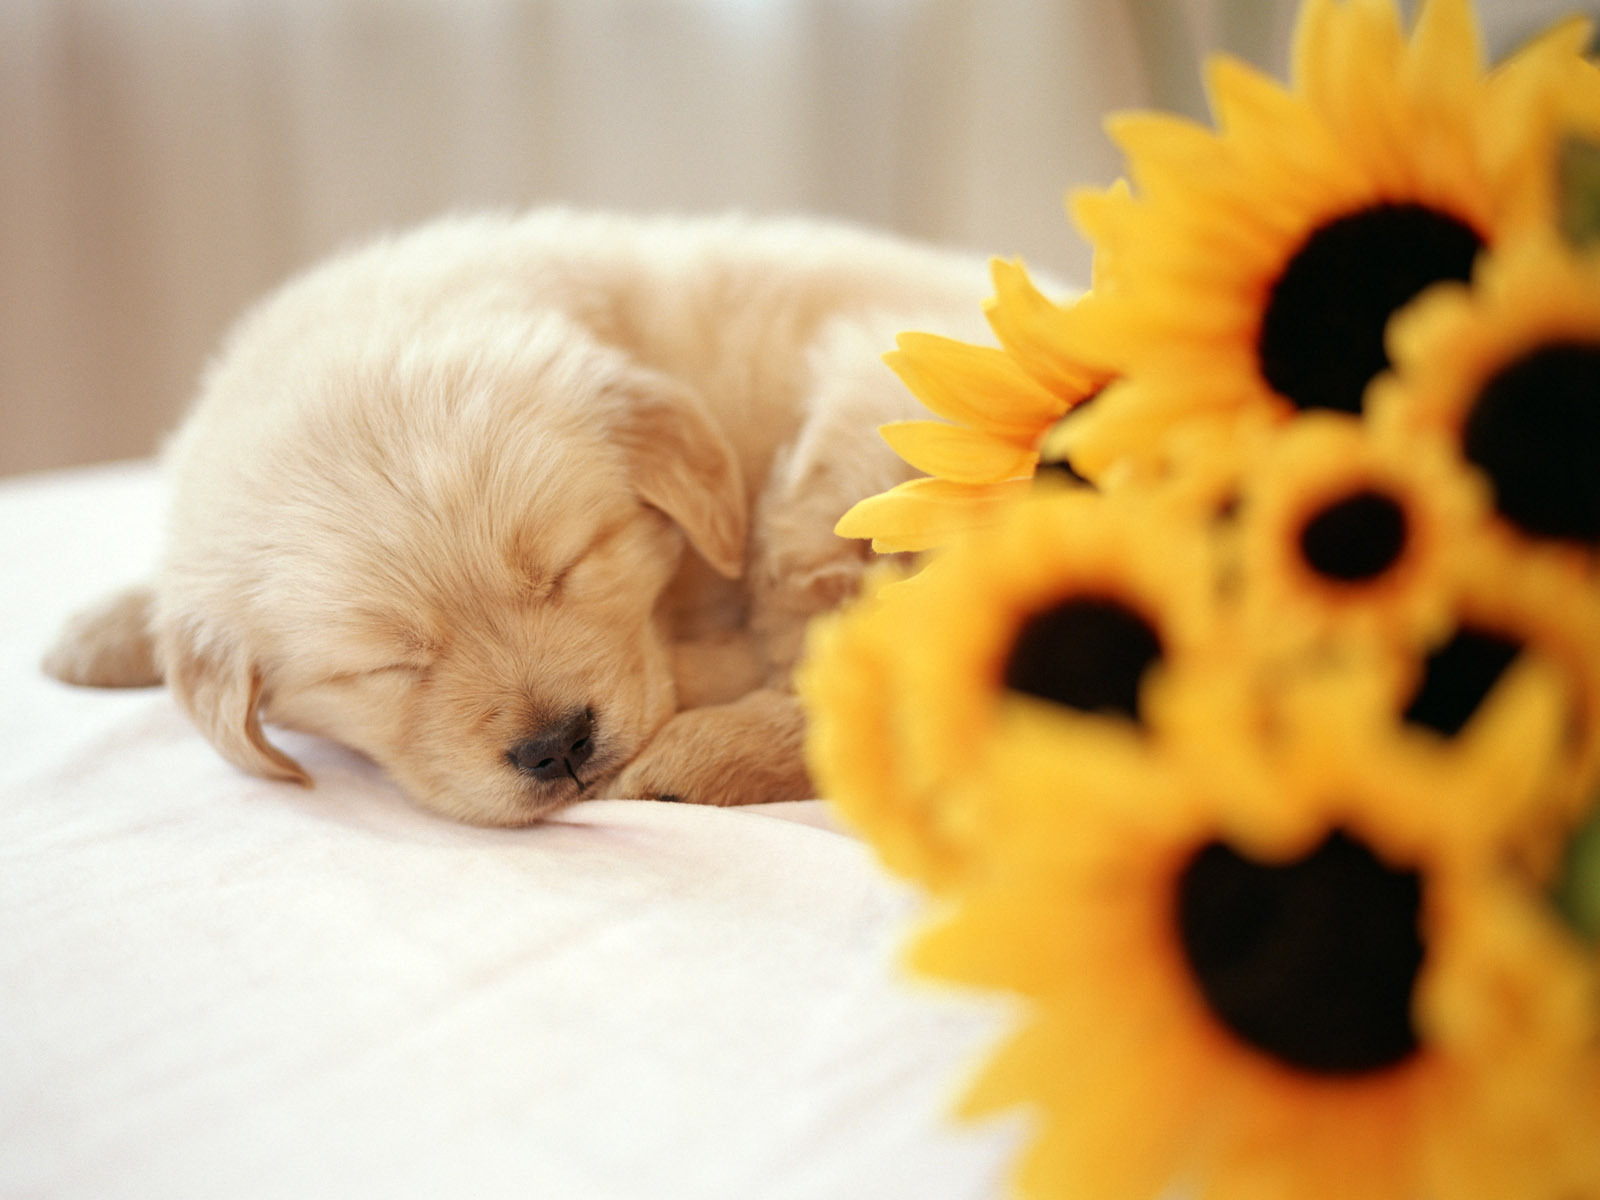 Puppies images So cute HD wallpaper and background photos 14749024